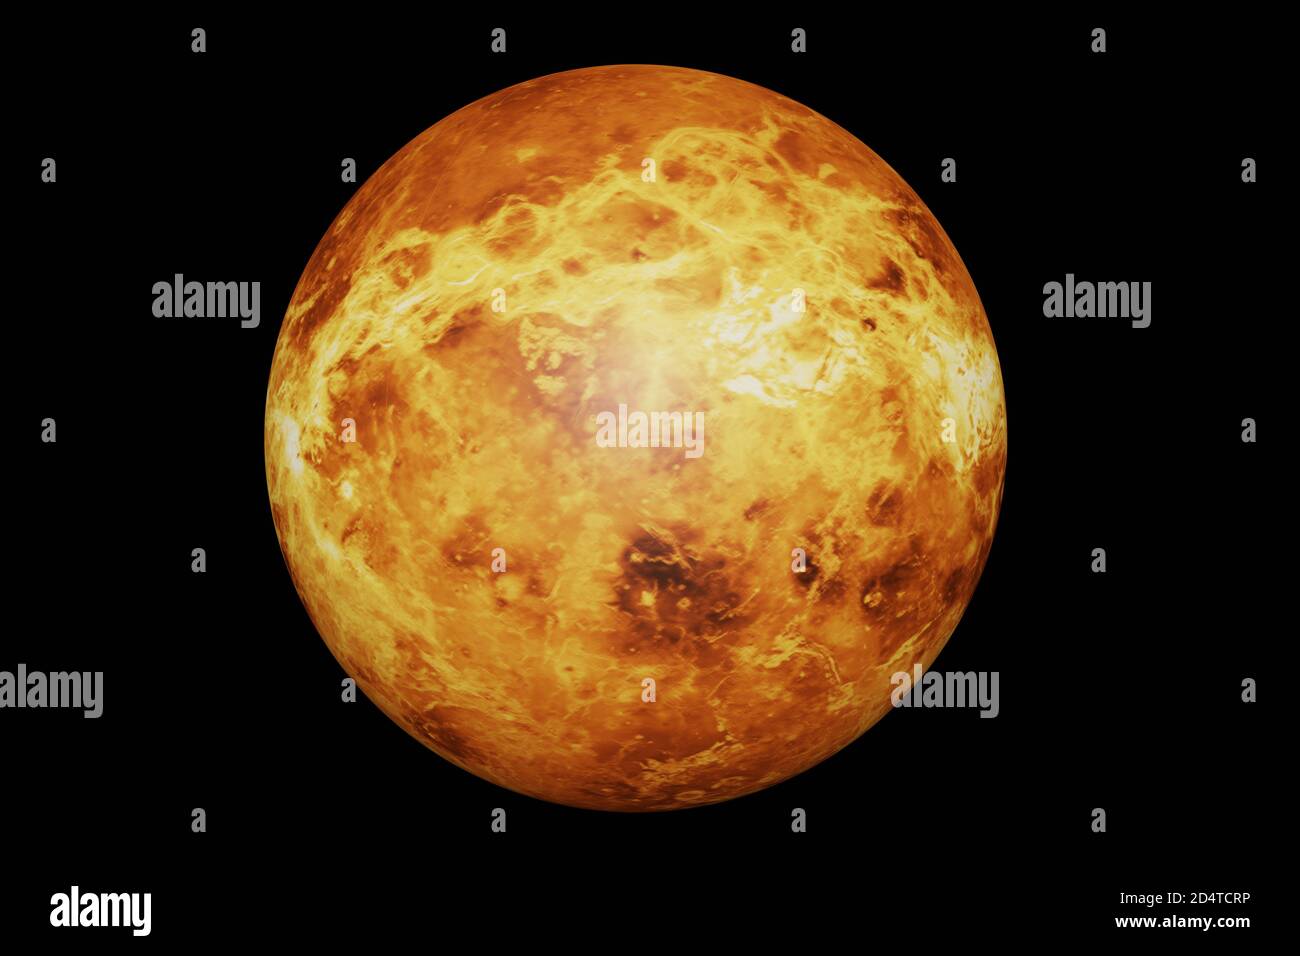 Highly detailed venus planet on black. Elements of this image furnished by NASA in 3D rendering Stock Photo